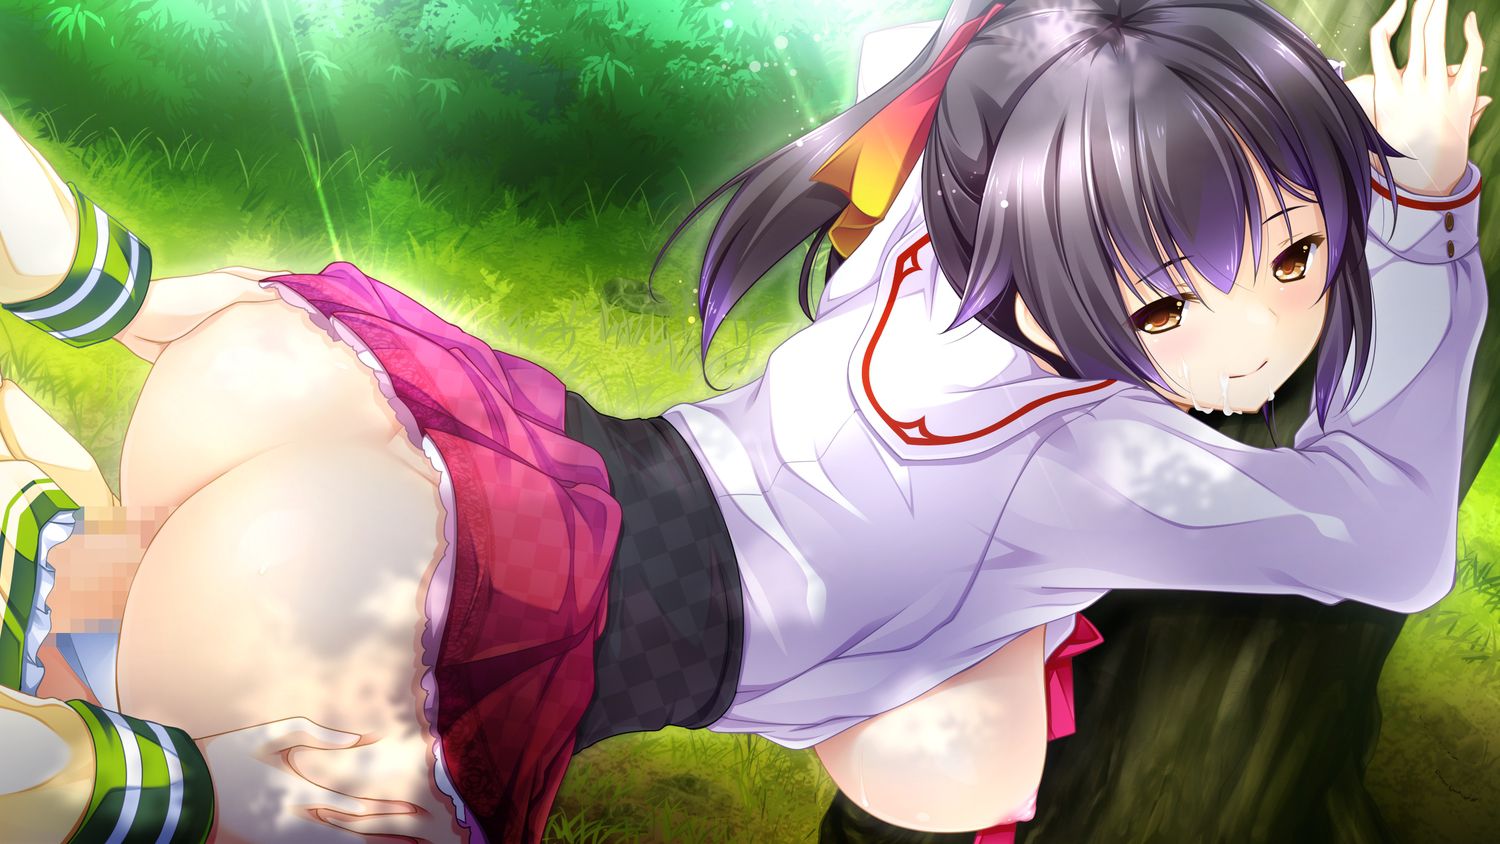 Essence of love decorate the maiden [18 eroge HCG] erotic pictures 8